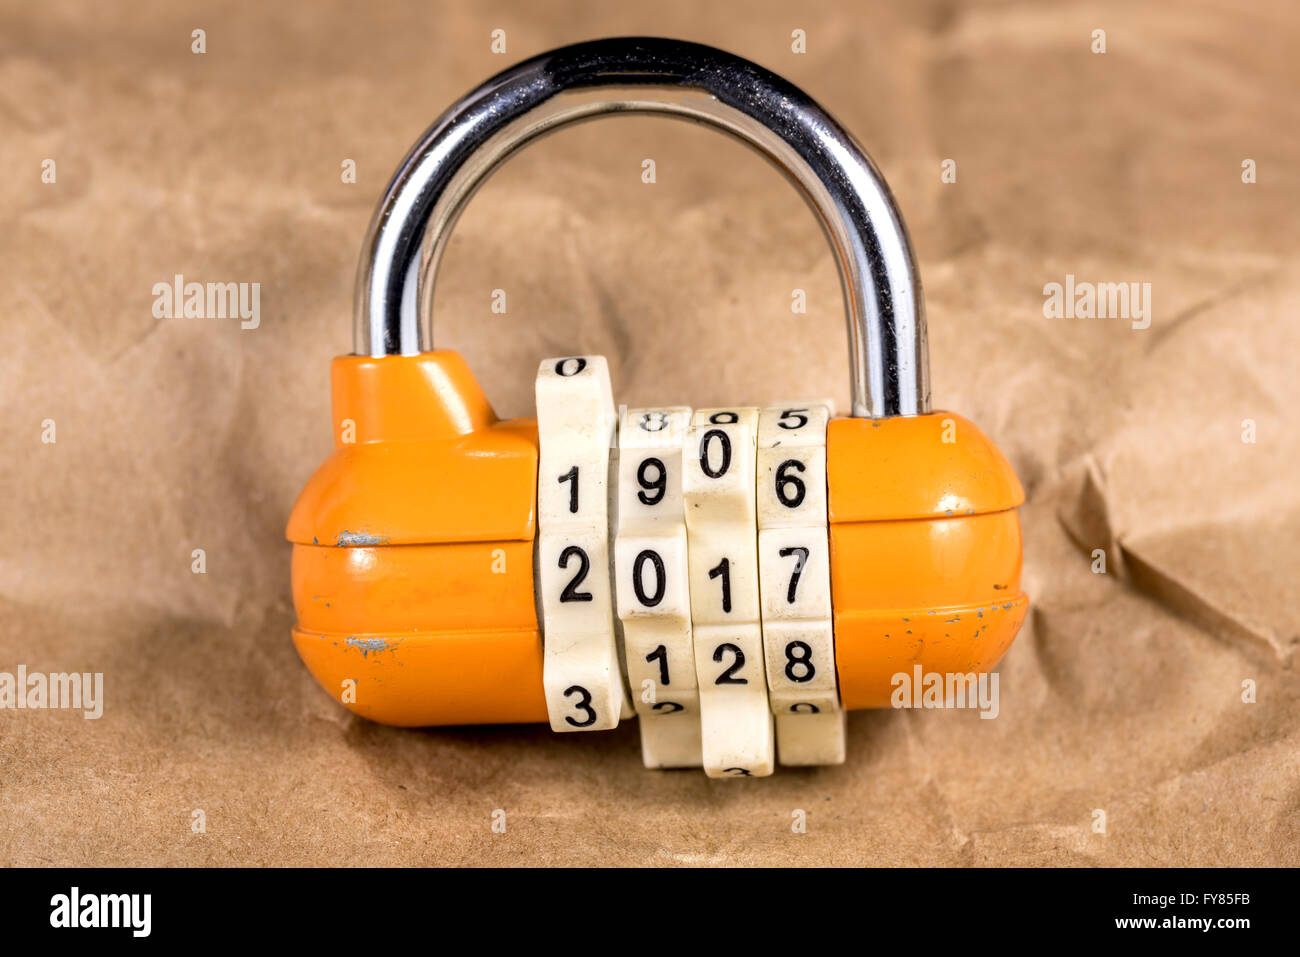 Padlock with the combination 2017 on it Stock Photo